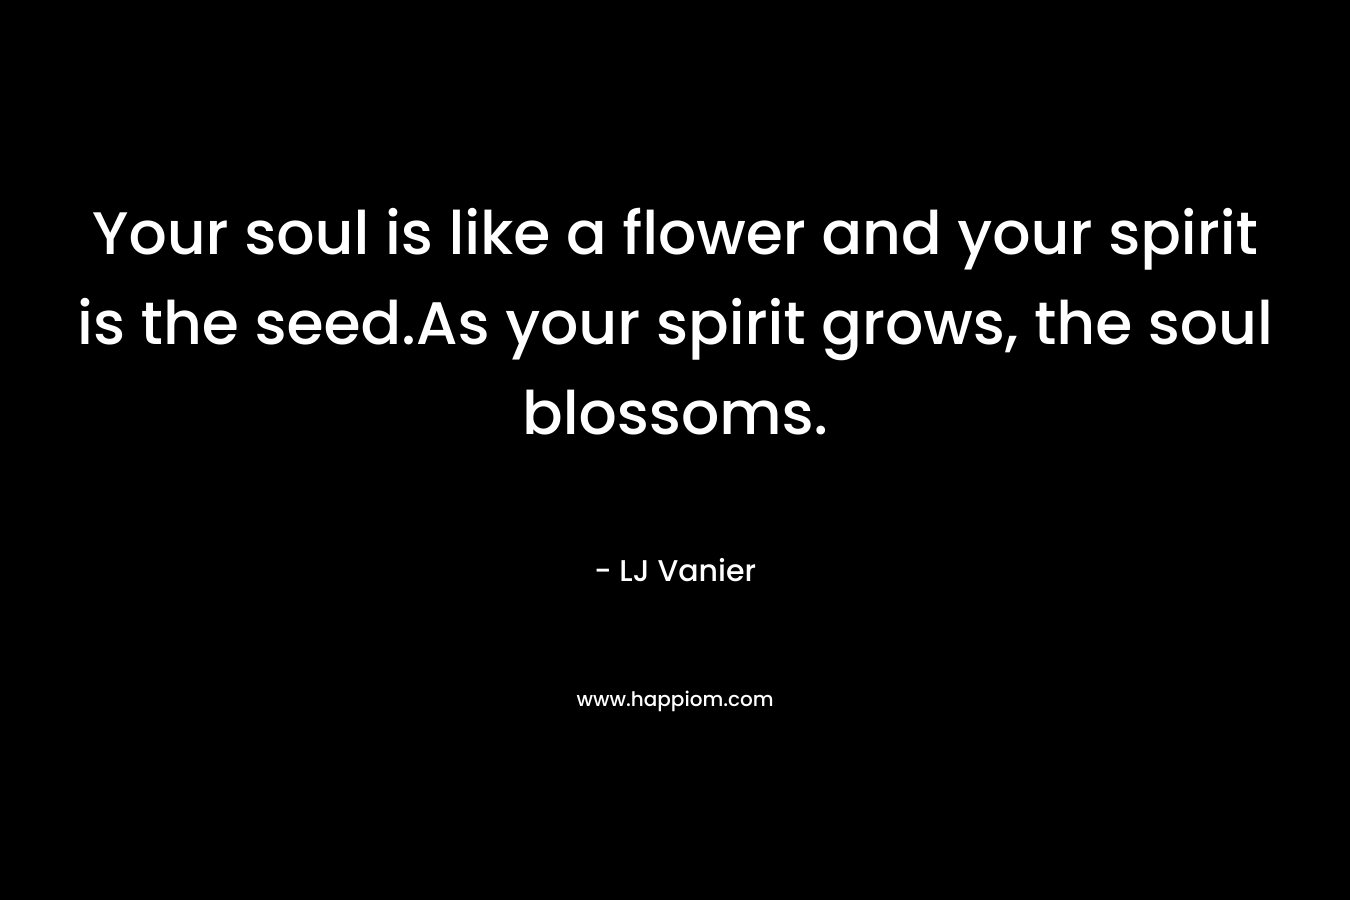 Your soul is like a flower and your spirit is the seed.As your spirit grows, the soul blossoms.